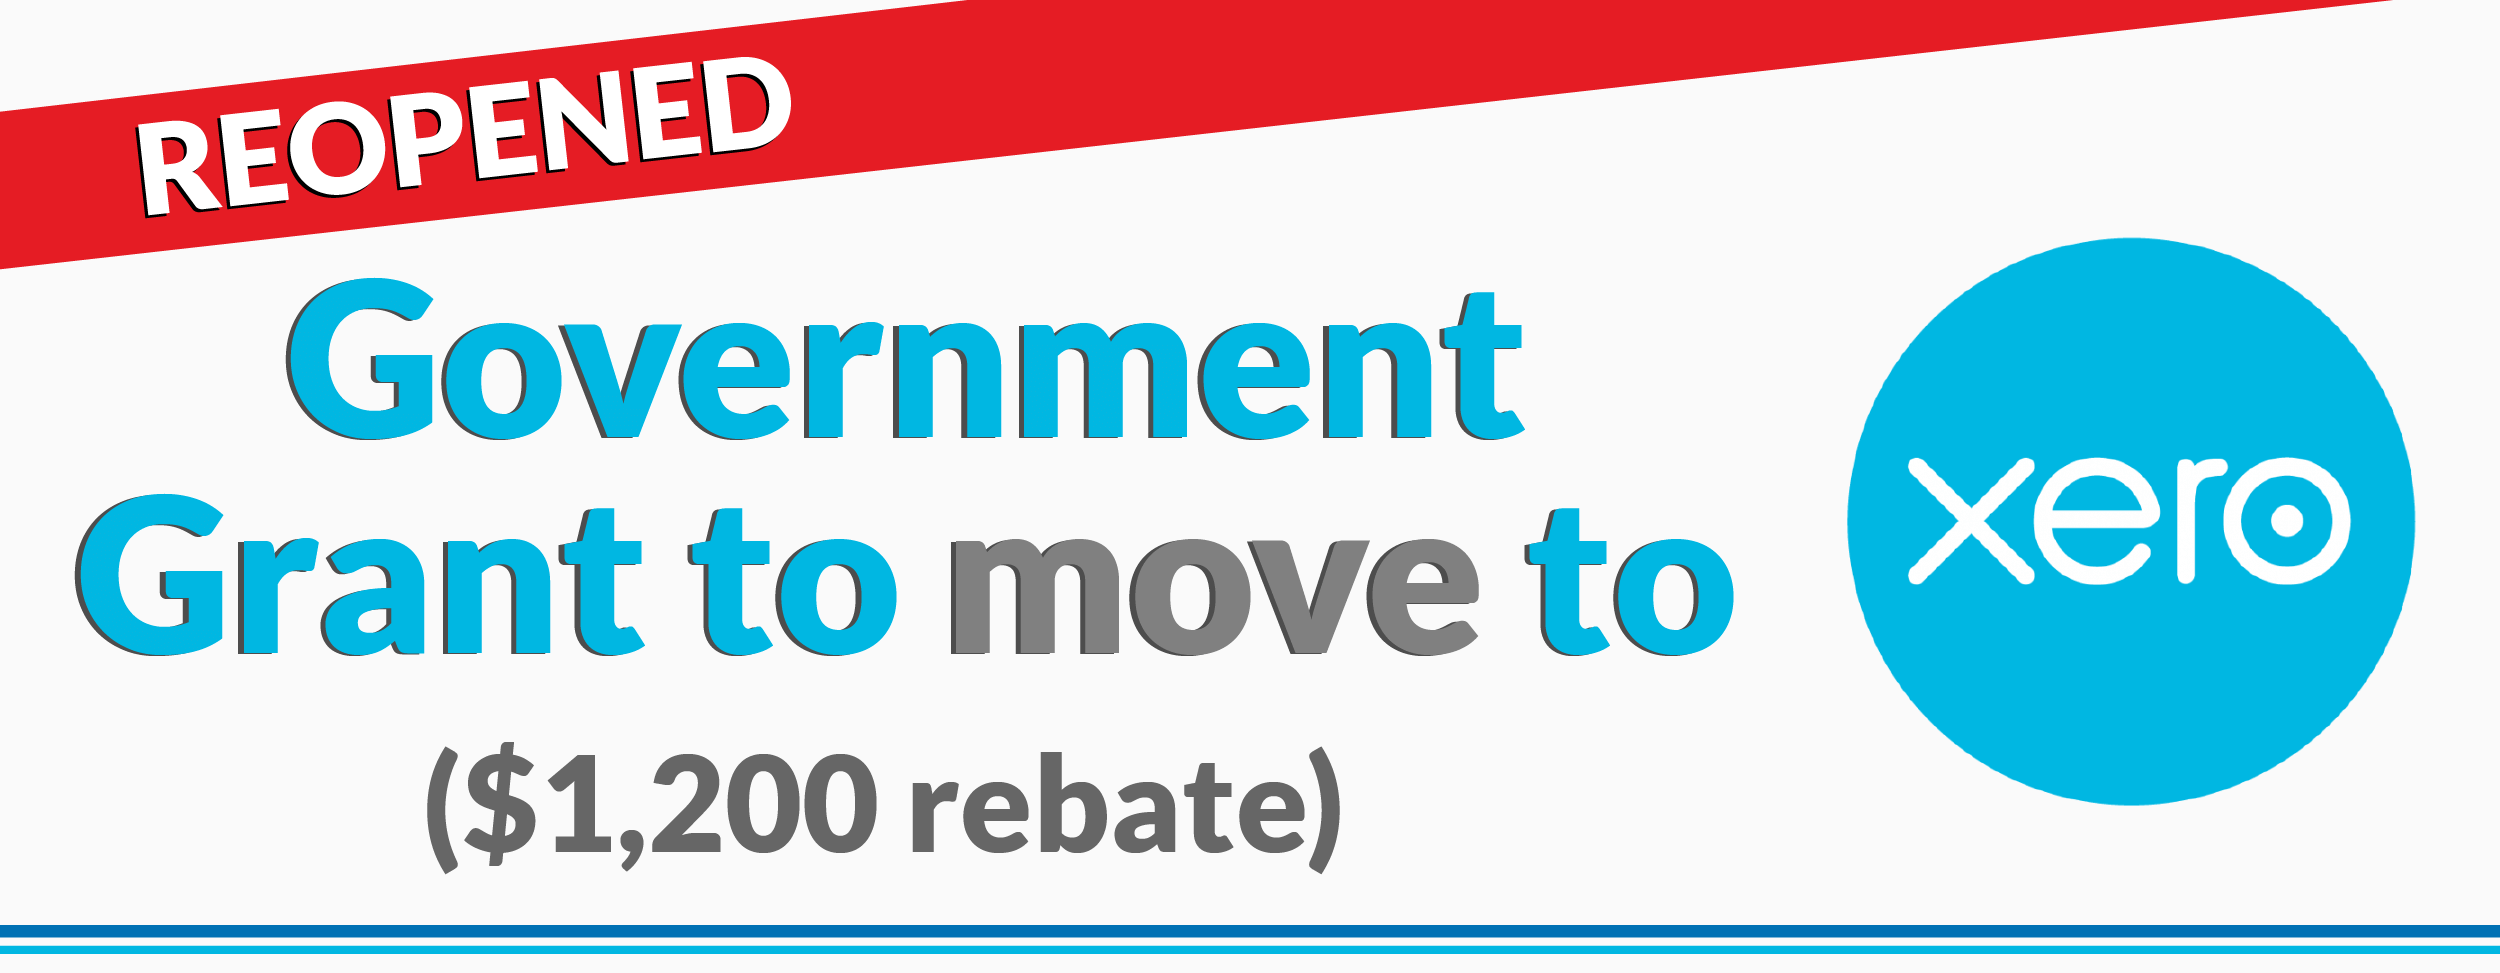 reopened-government-grant-to-move-to-xero-1-200-rebate-c-h